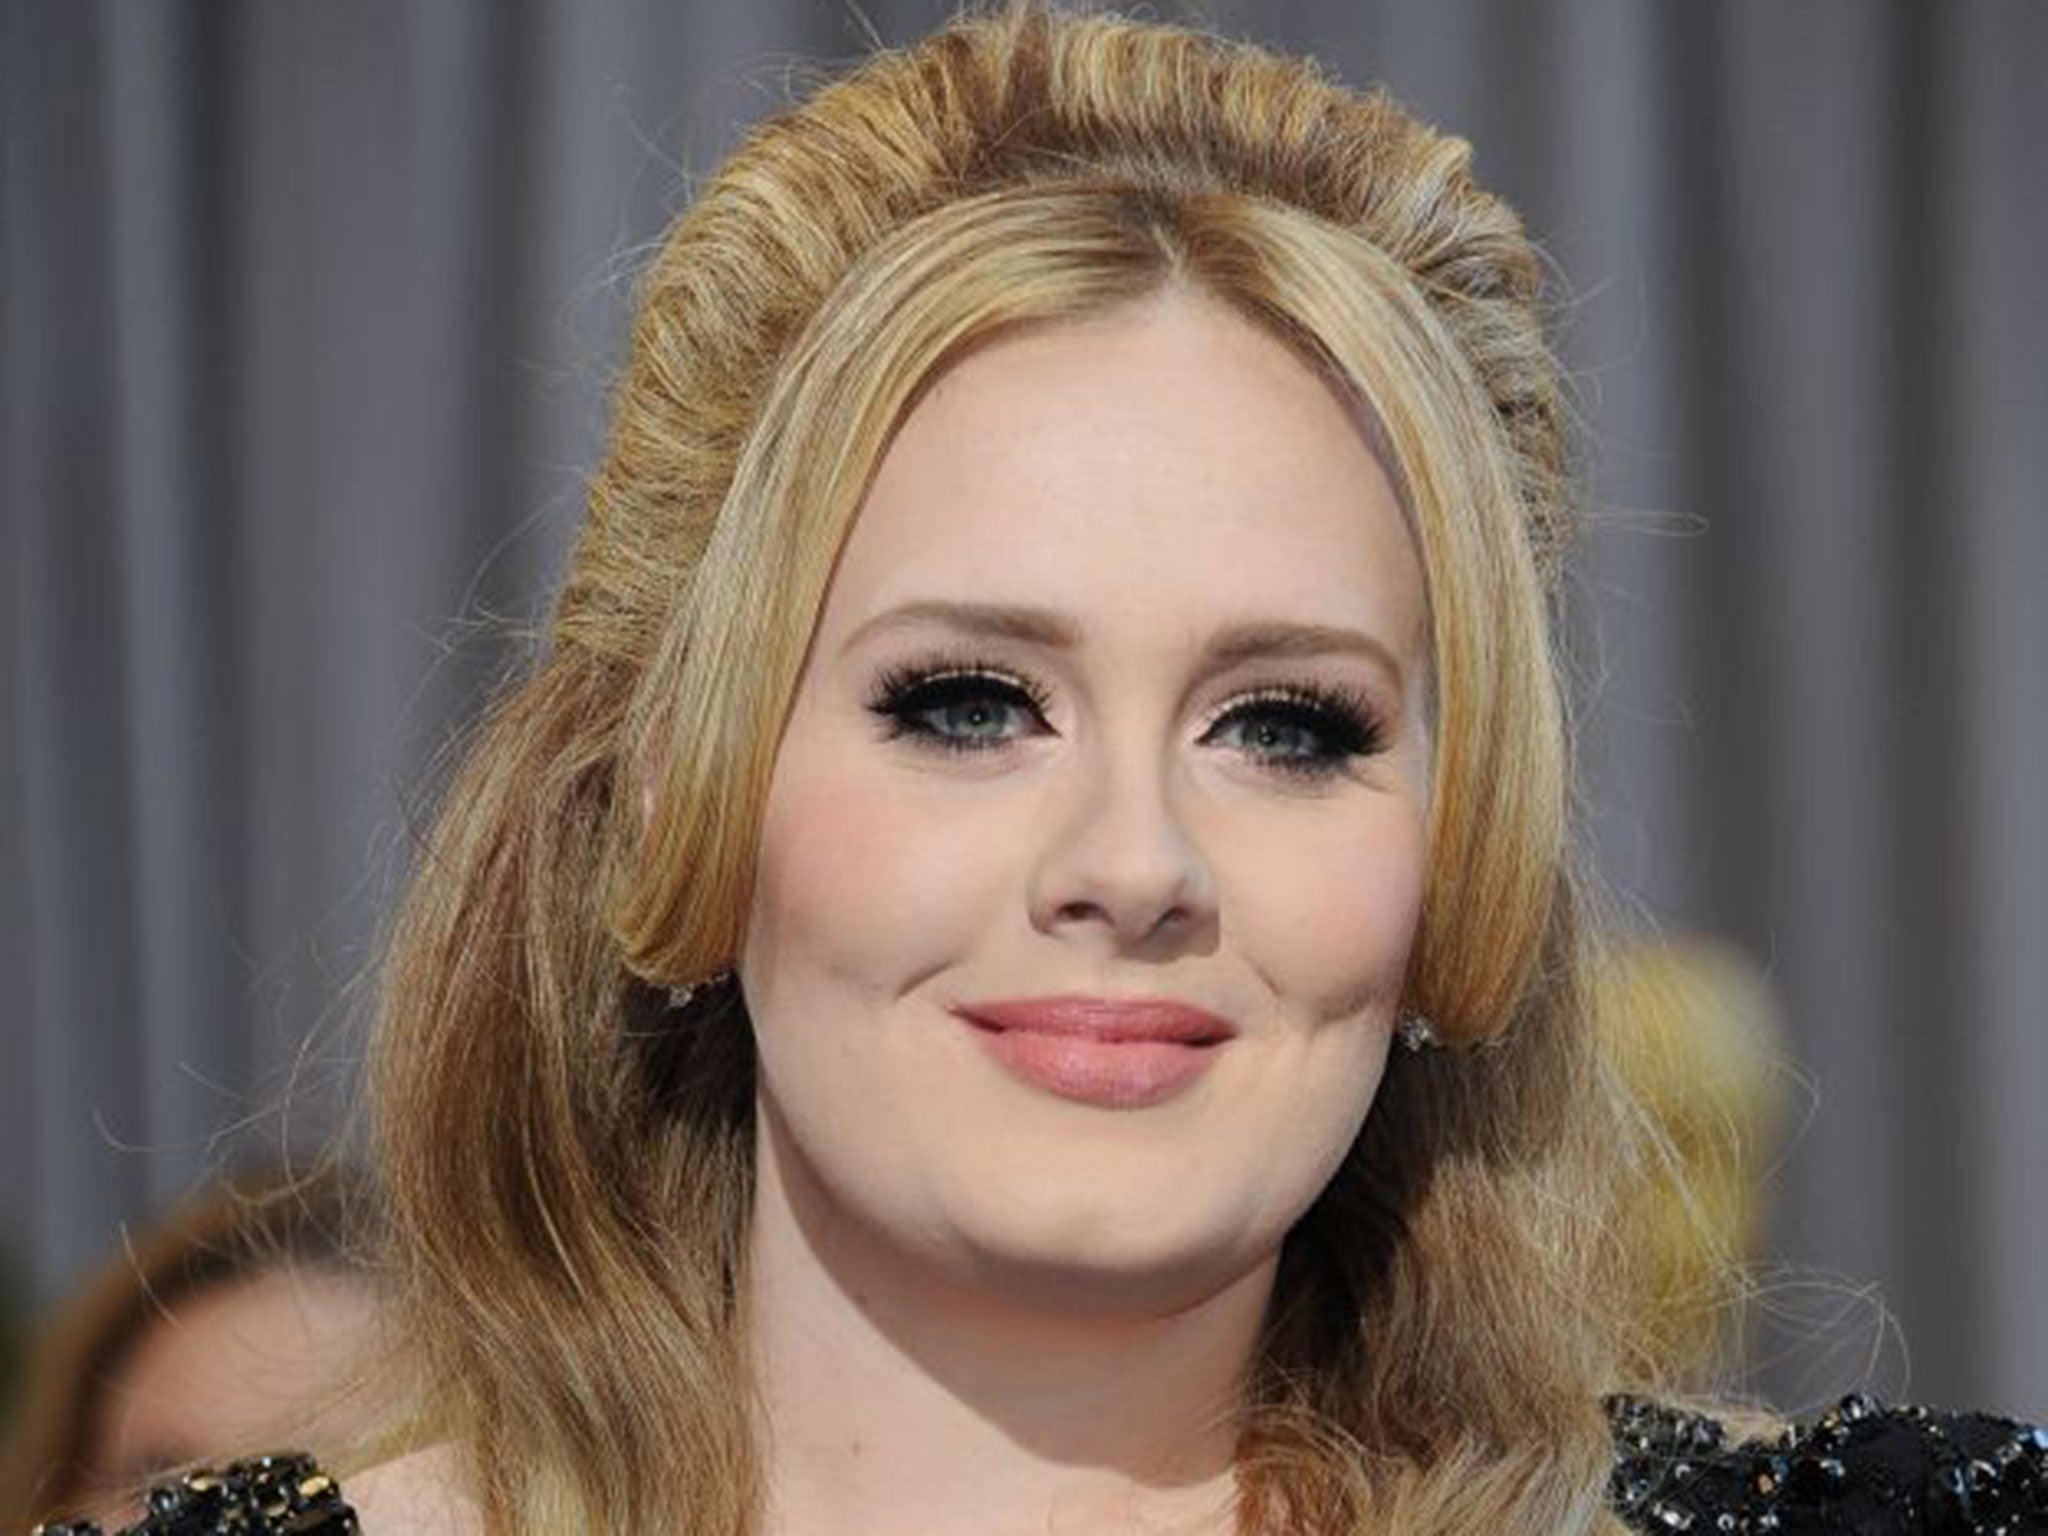 Adele, who is nominated in four categories, will be performing at the Brits ceremony on 24 February